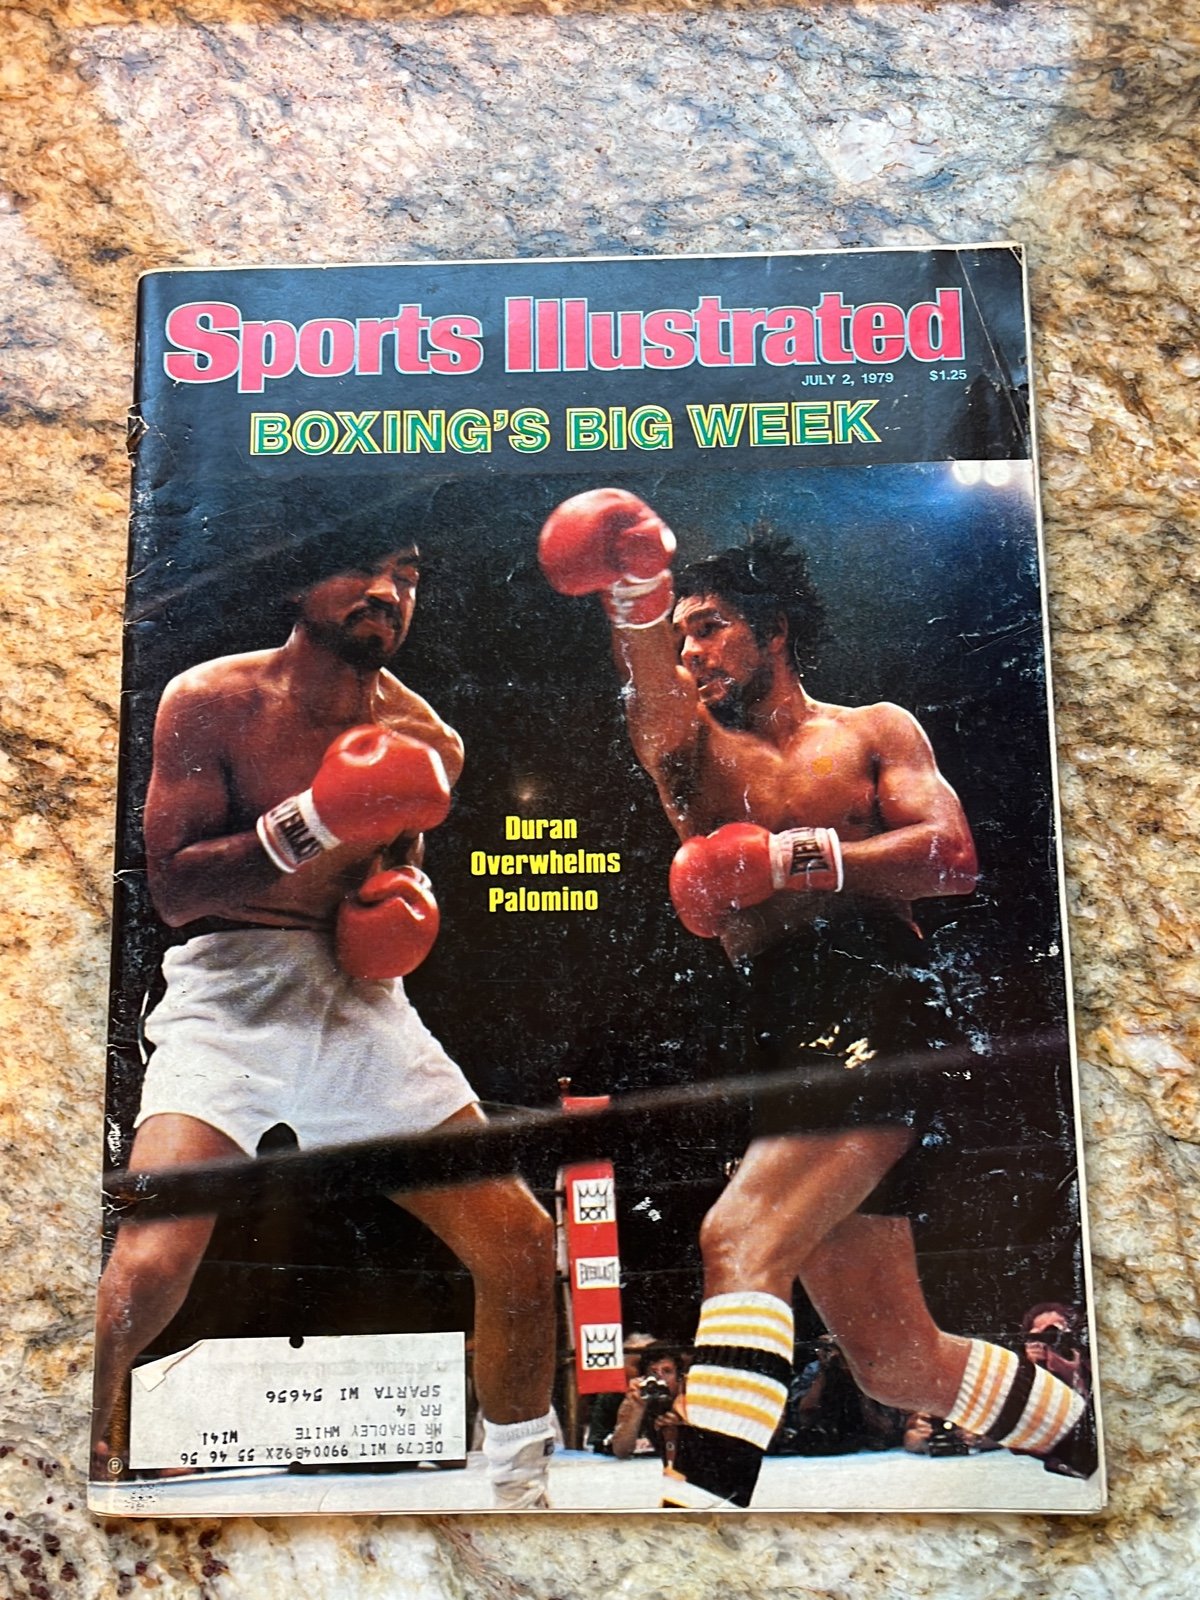 Sports Illustrated July 2, 1979 ee57a7aCT